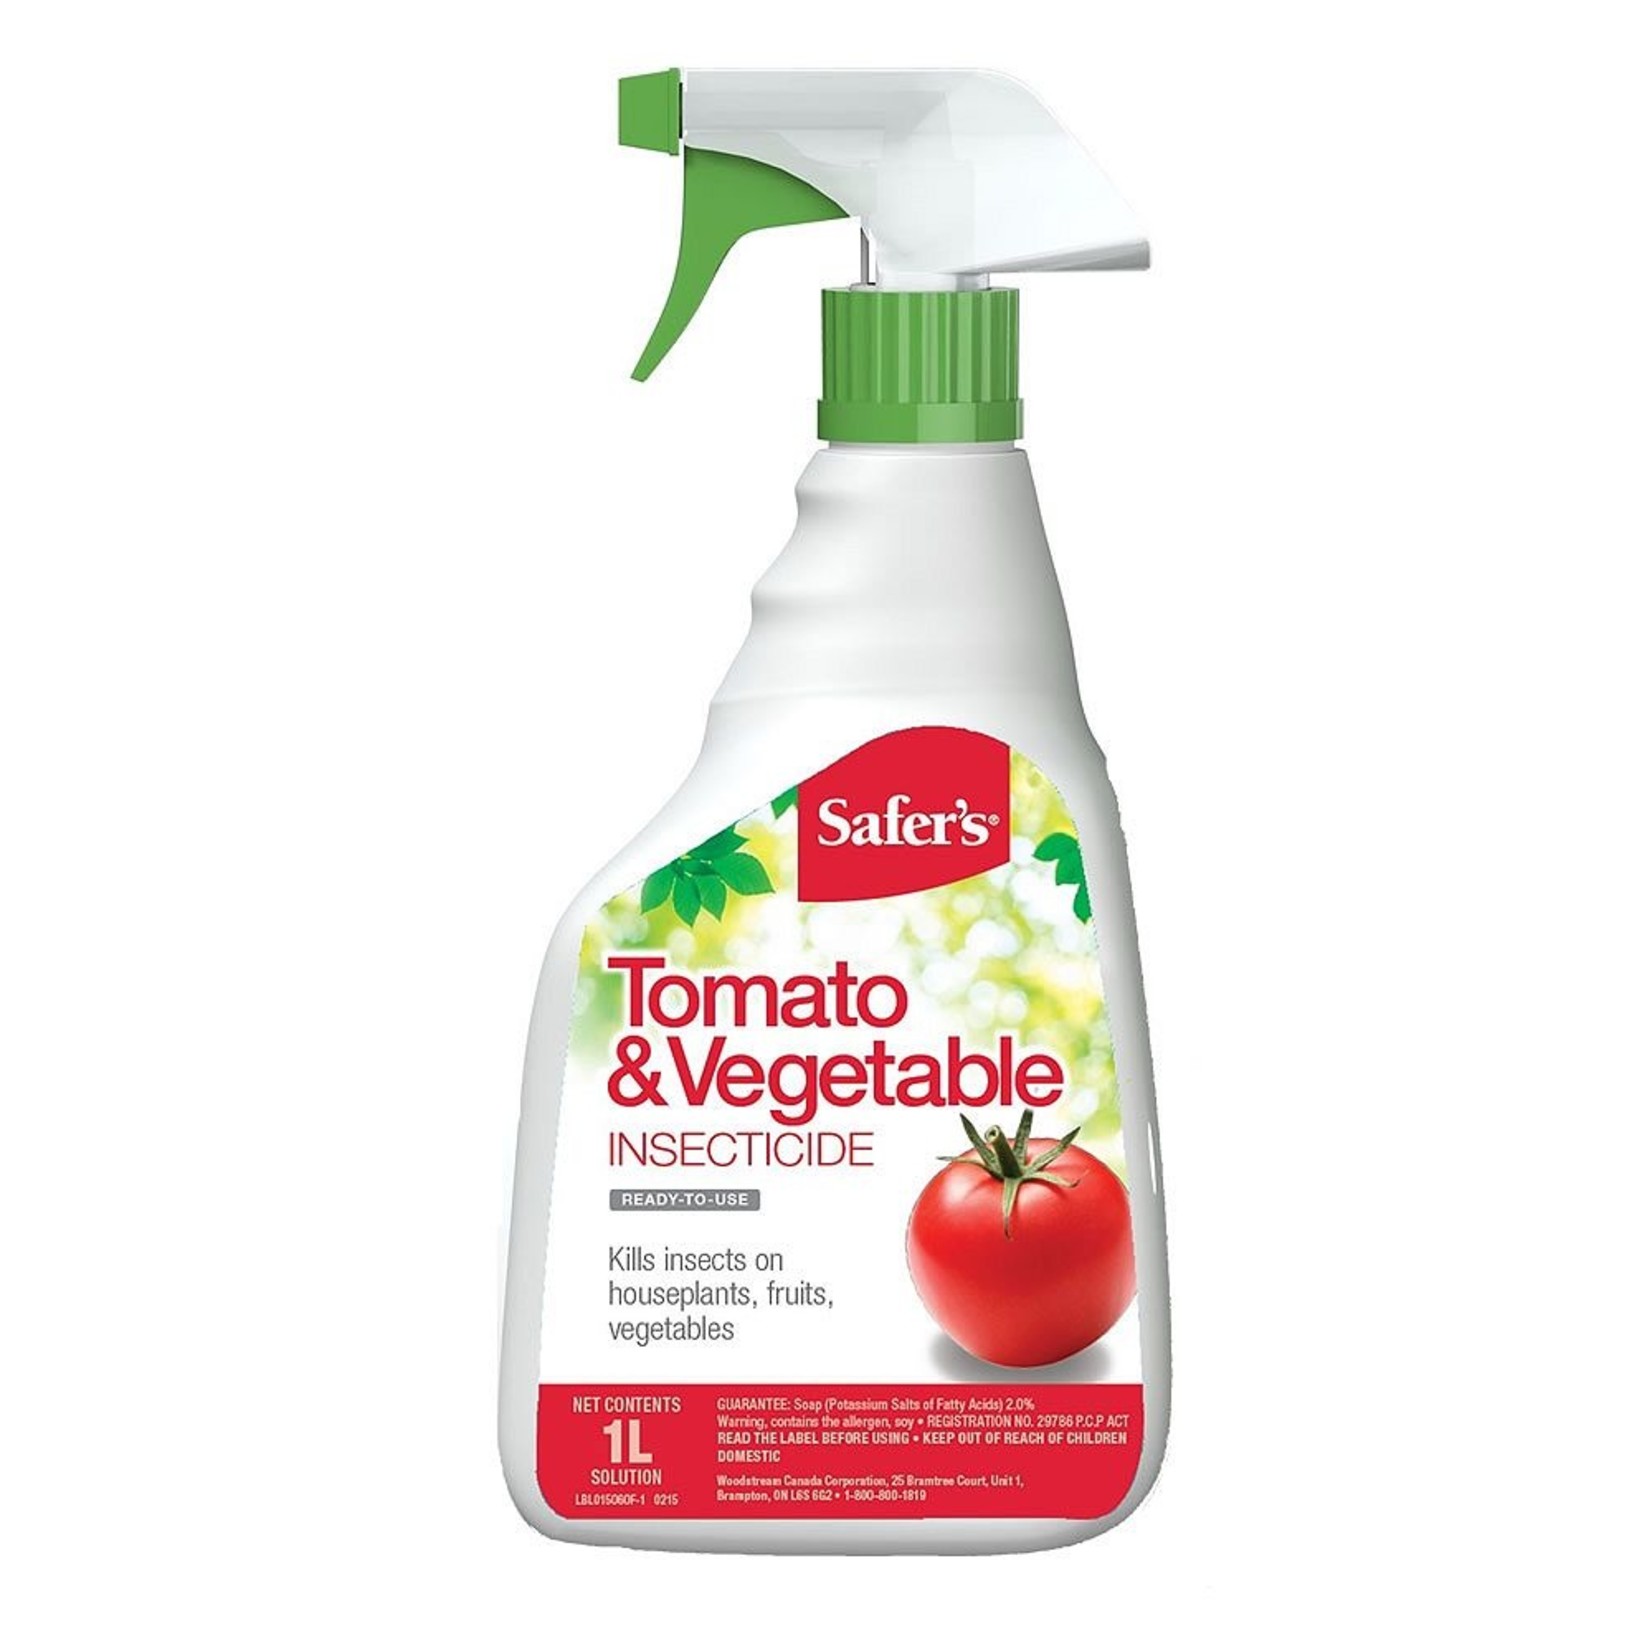 Safer's Tomato & Vegetable Insecticide